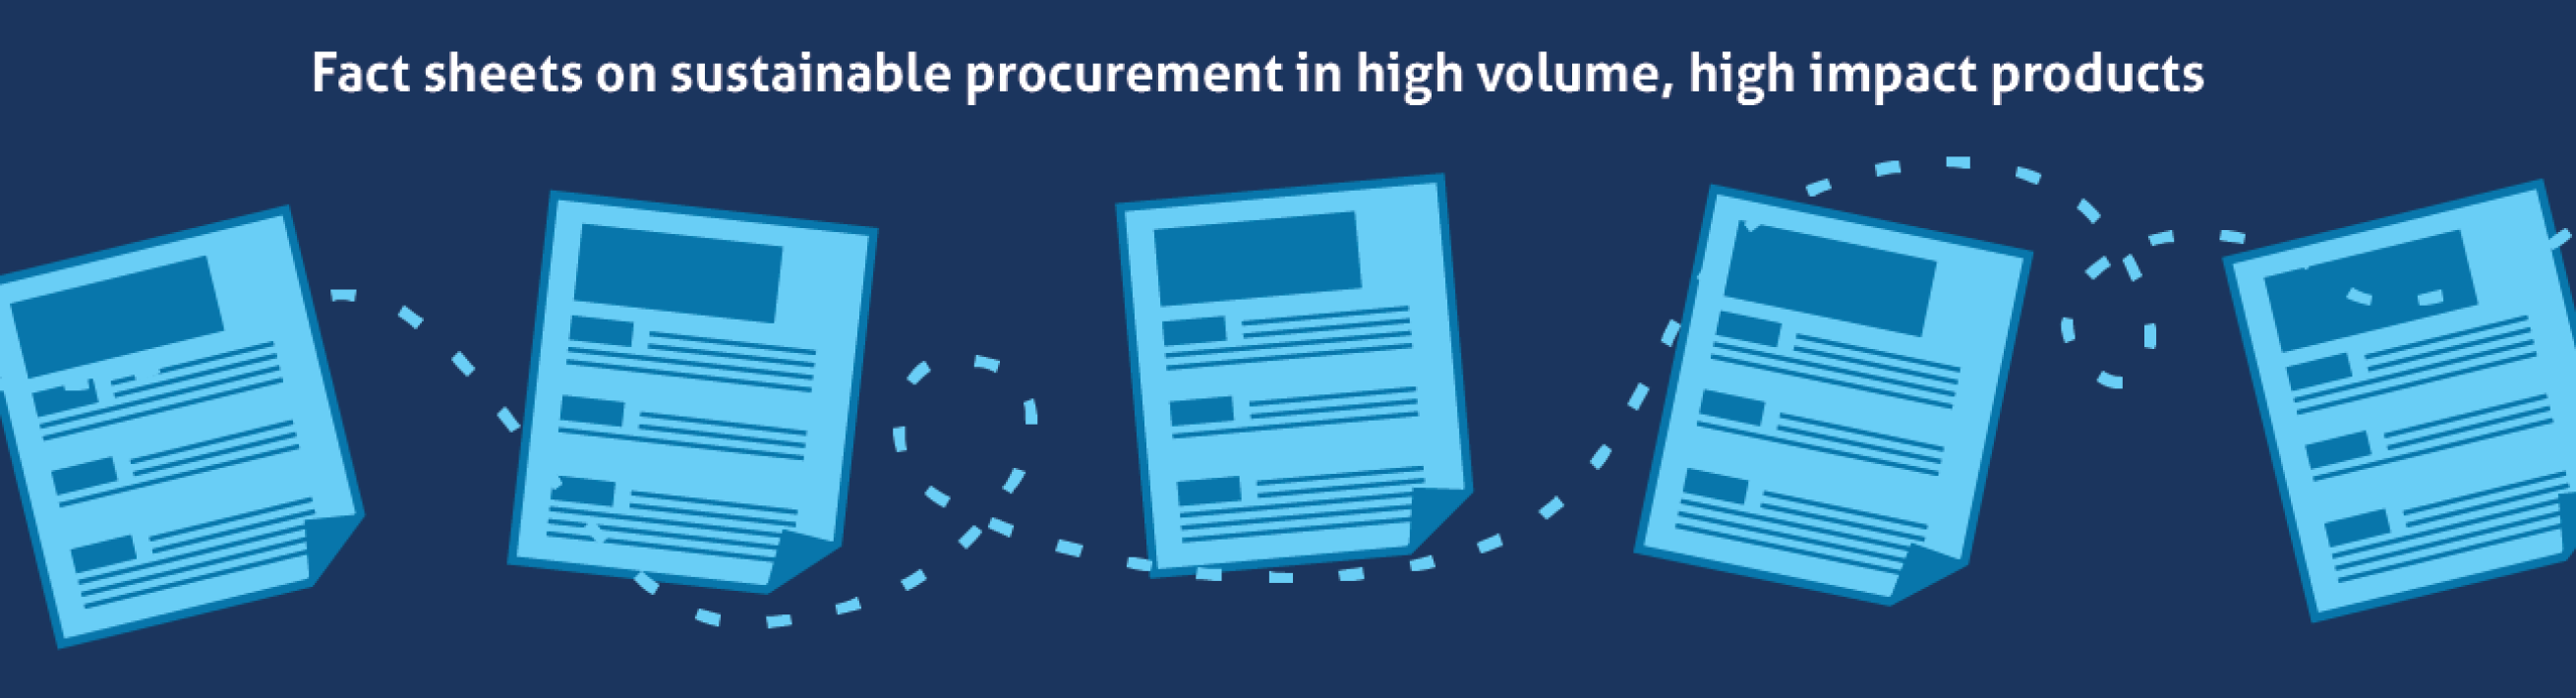 Fact sheets on sustainable procurement in high volume, high impact products